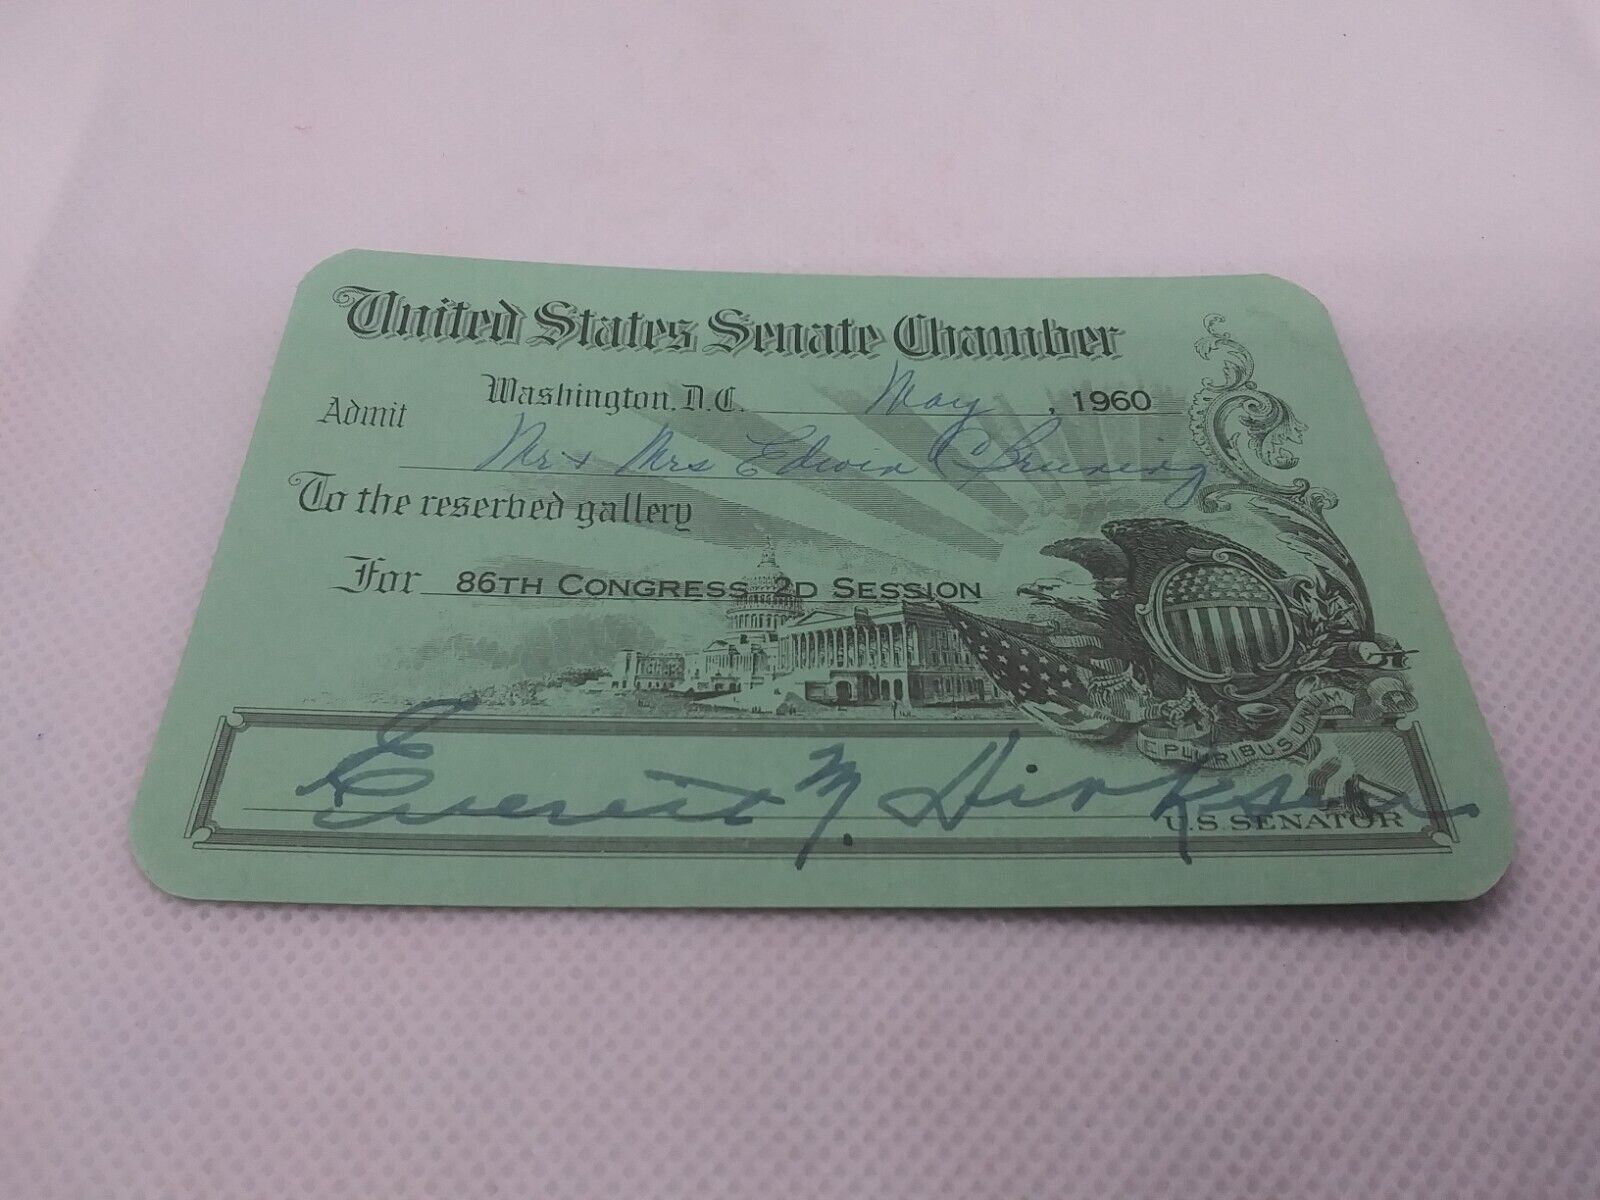 Vintage 1960 United States Senate Chamber Pass Card 86th Congress 2D Session